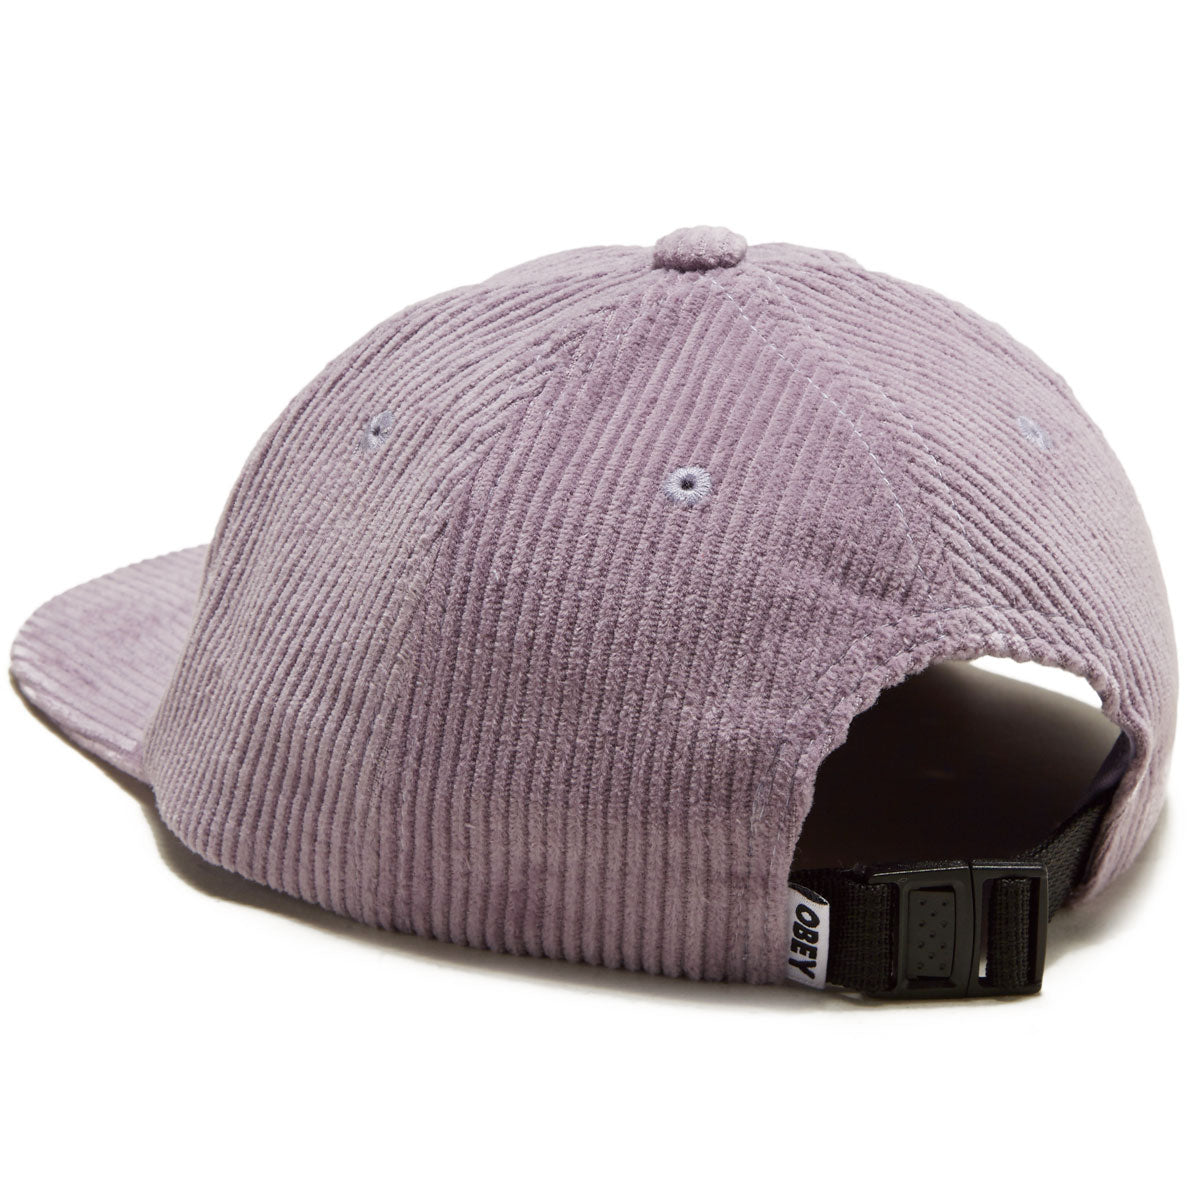 Obey Cord Label 6 Panel Strapback Hat - Wineberry image 2